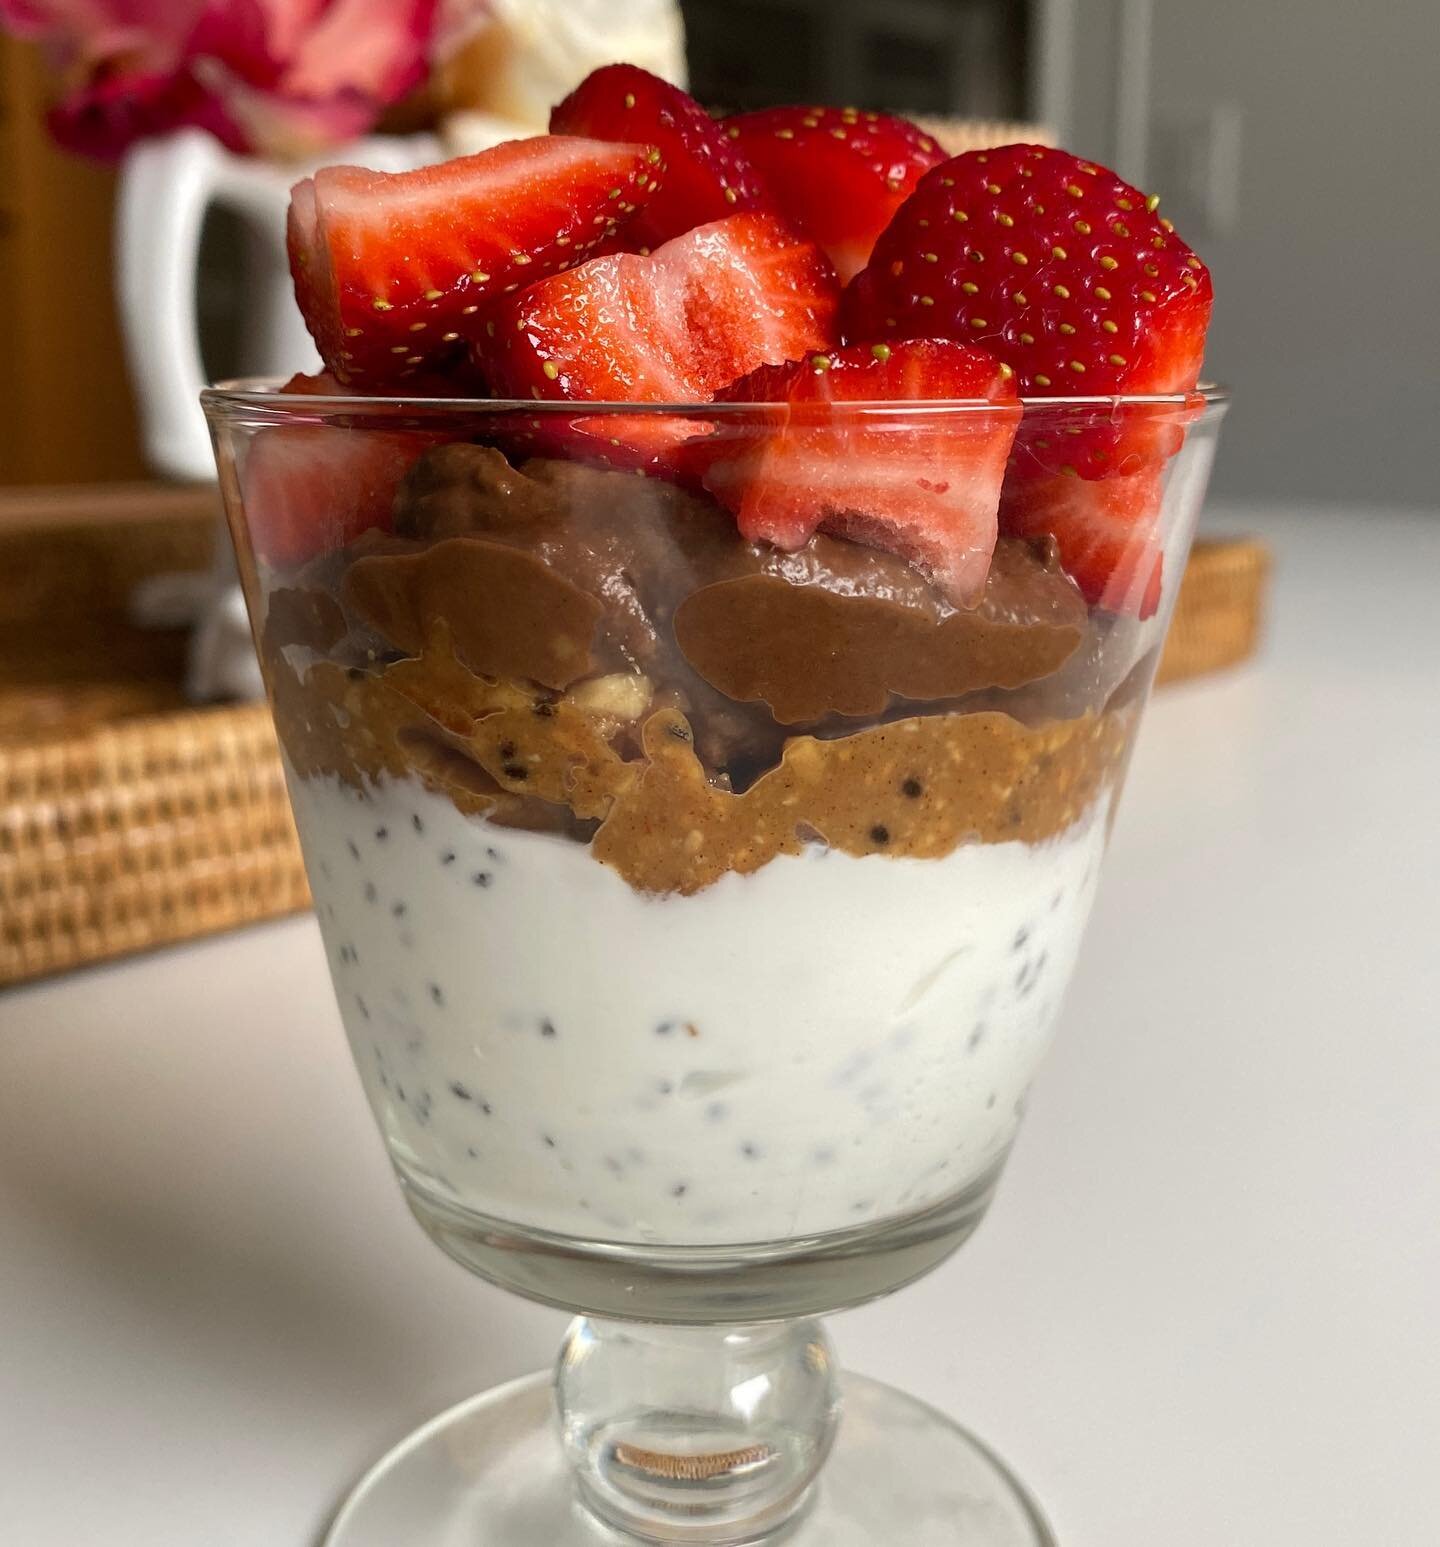 Guilt-free breakfast &ldquo;sundae&rdquo;&hellip; wondering what&rsquo;s inside the glass? Started with plain, 2% Greek yogurt with a Tbsp of chia seeds mixed in, layered with 1 Tbsp organic @blissnutbutters cinnamon chia seed peanut butter, topped w